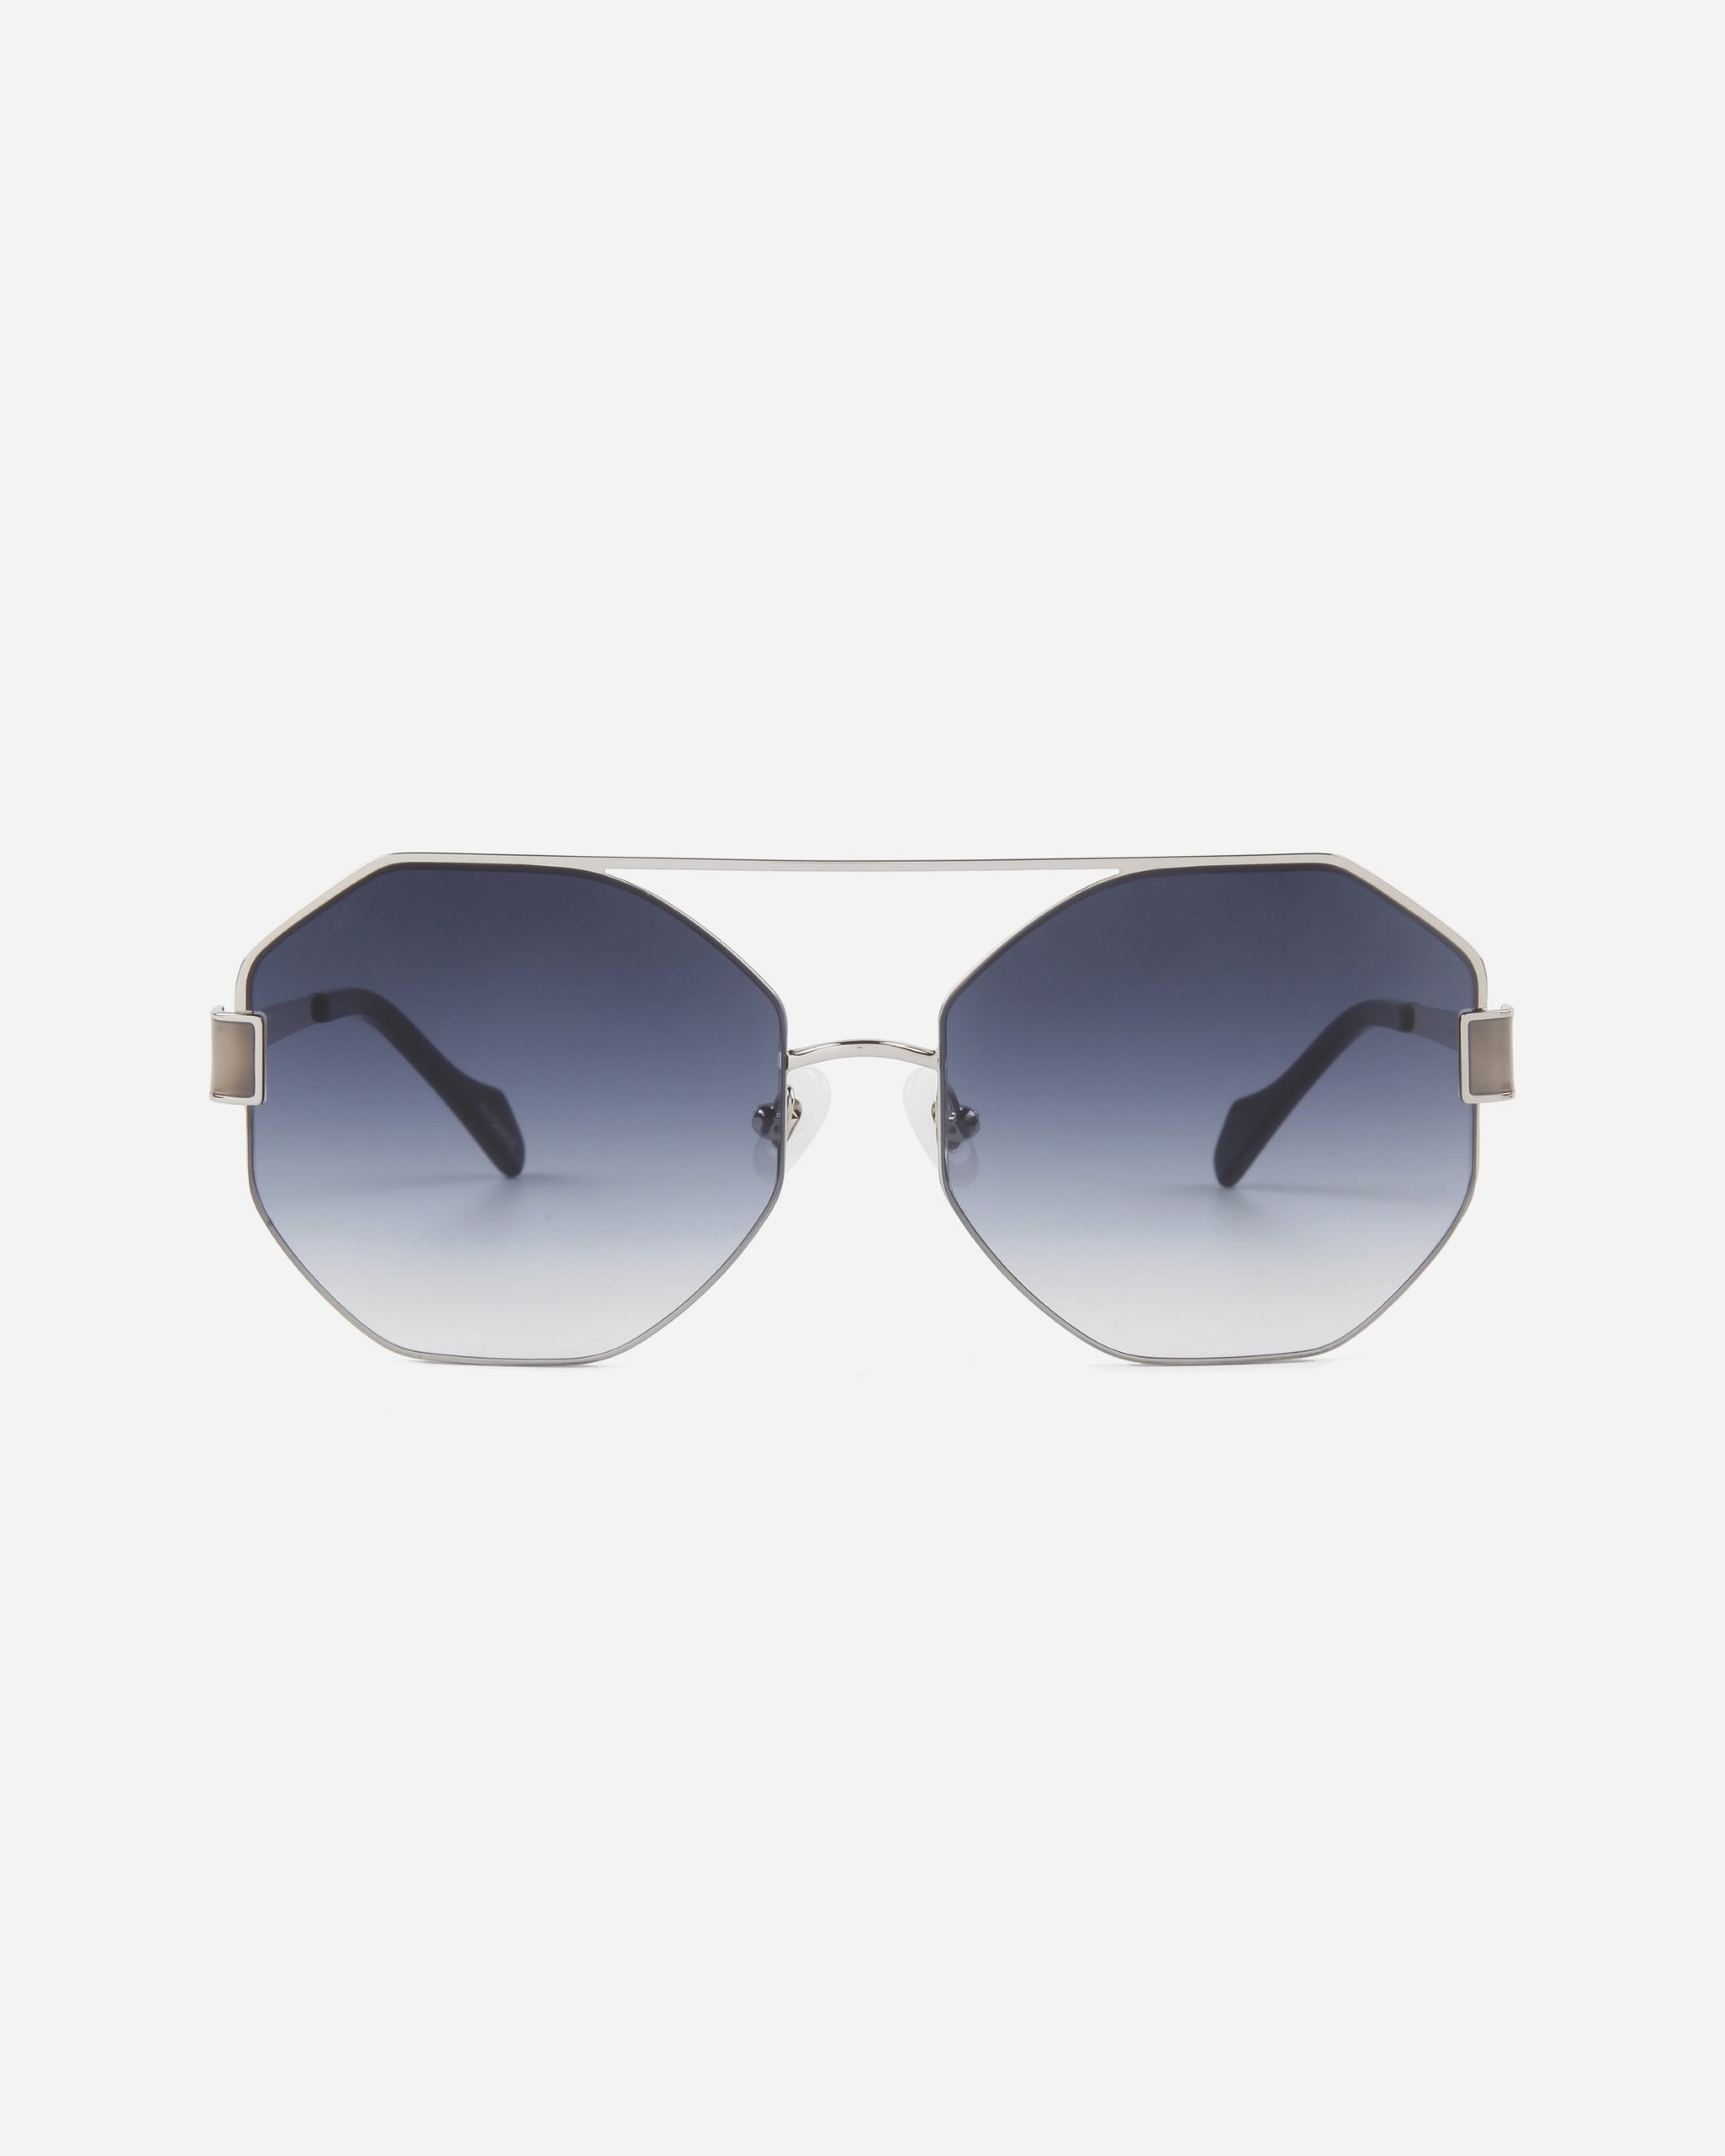 A pair of stylish Mania sunglasses by For Art&#39;s Sake® featuring octagonal, nylon lenses with a gradient tint from dark blue at the top to light at the bottom. The stainless steel frames are thin and metallic, with black temple arms and adjustable nose pads for comfort. The background is plain white.